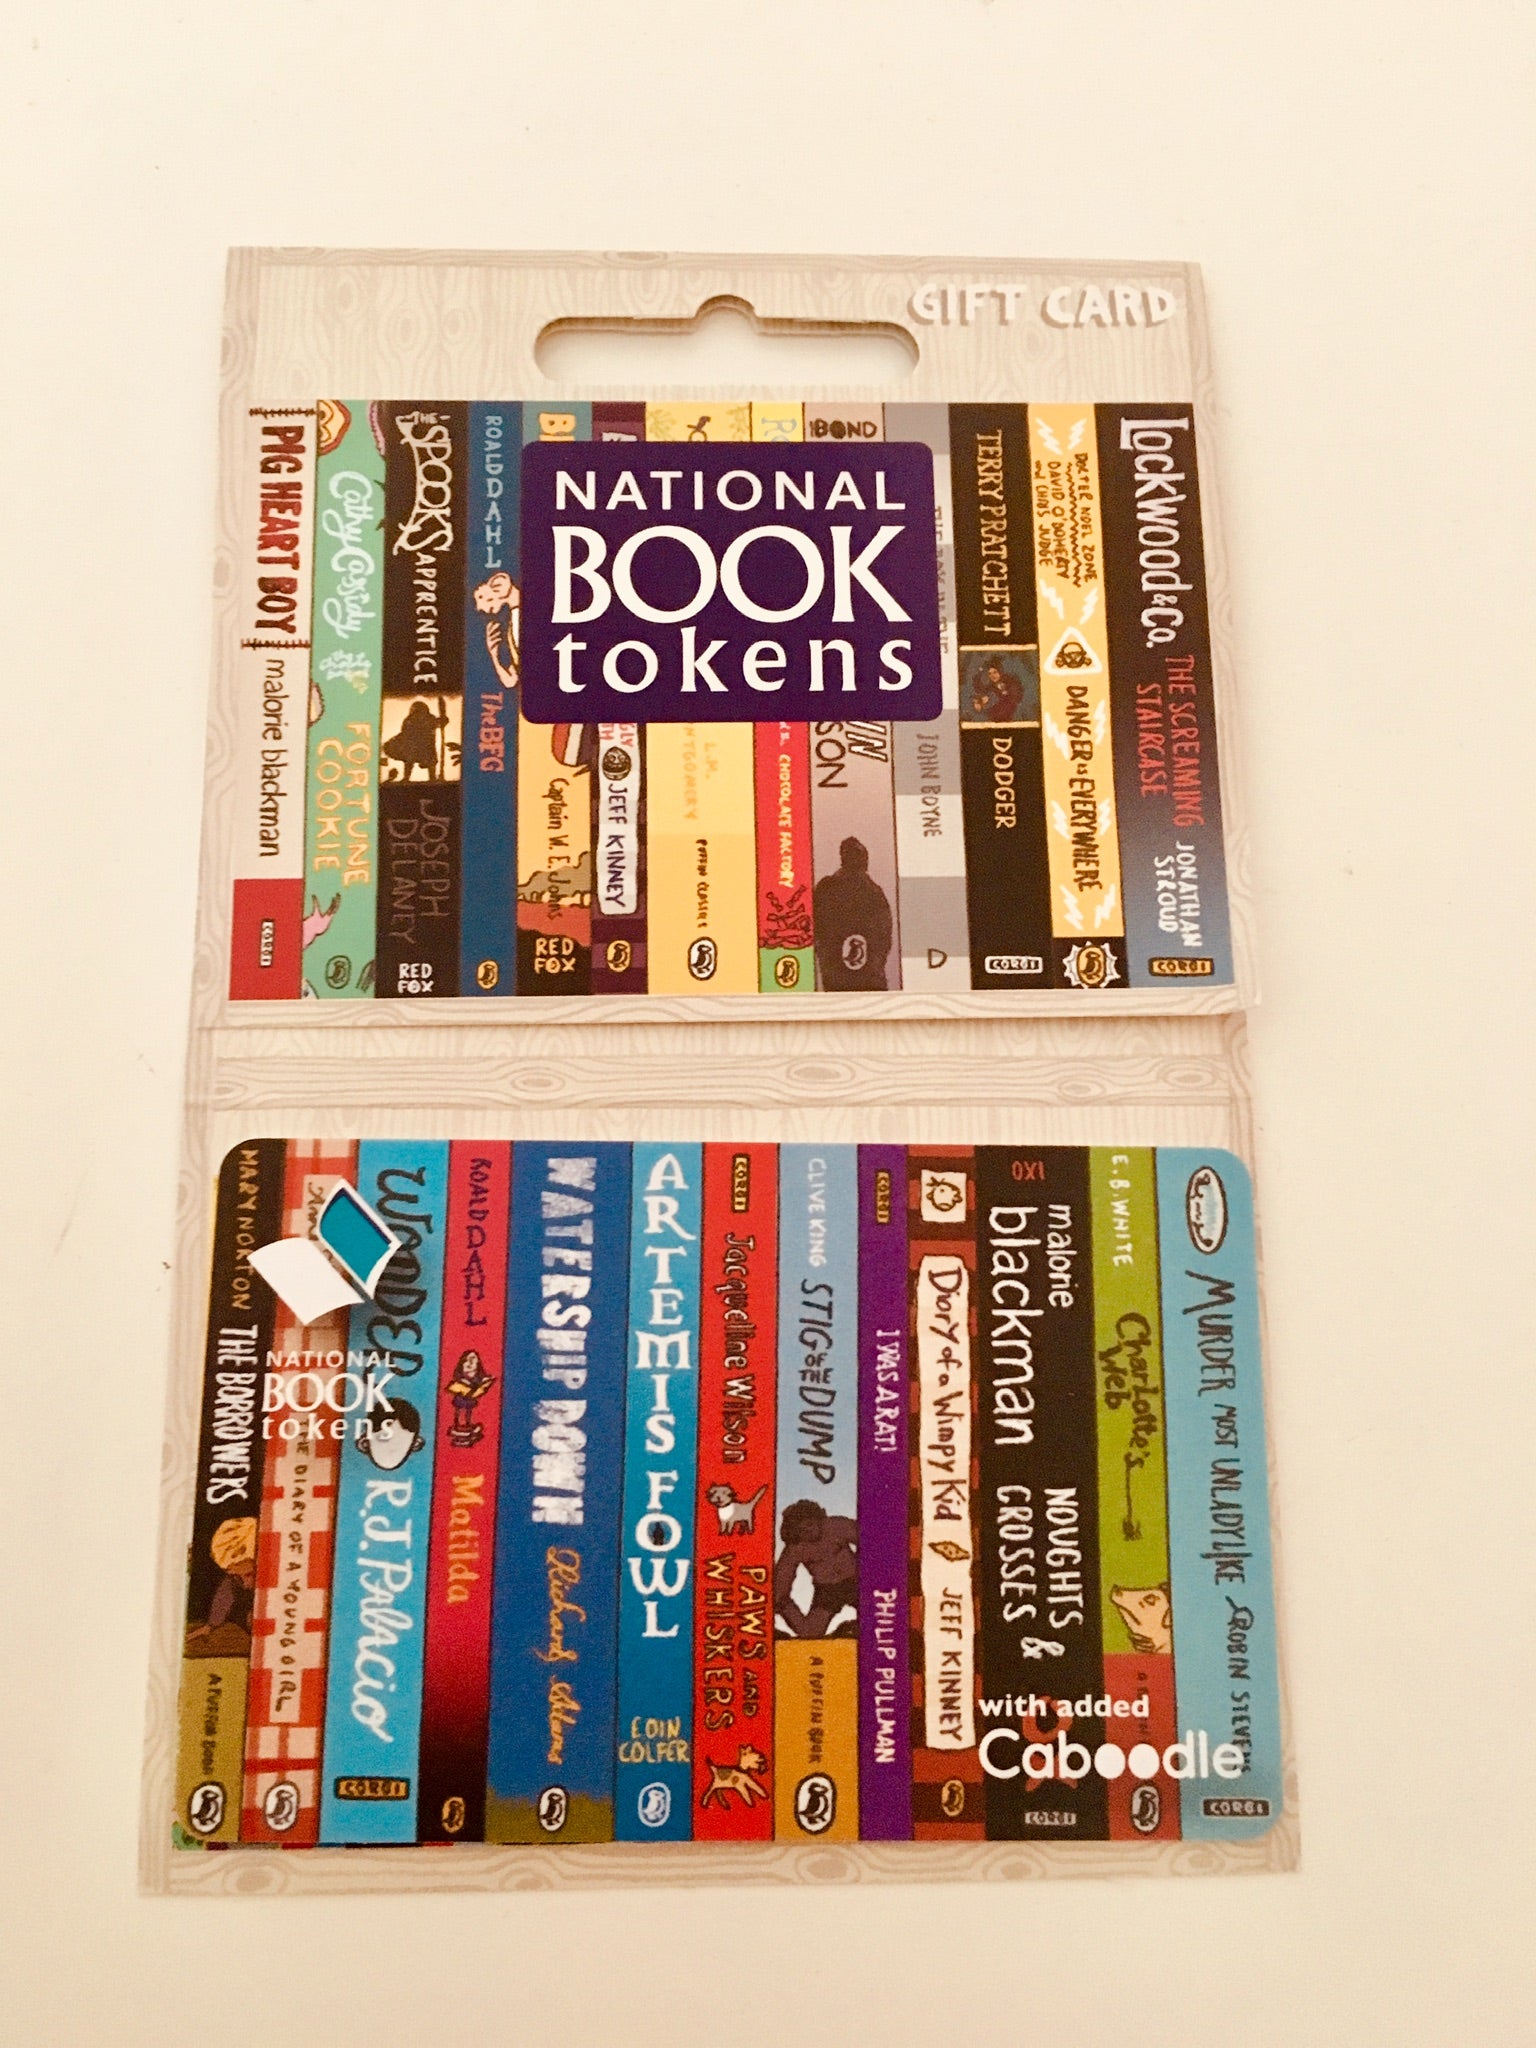 Booksellers Association - National Book Tokens